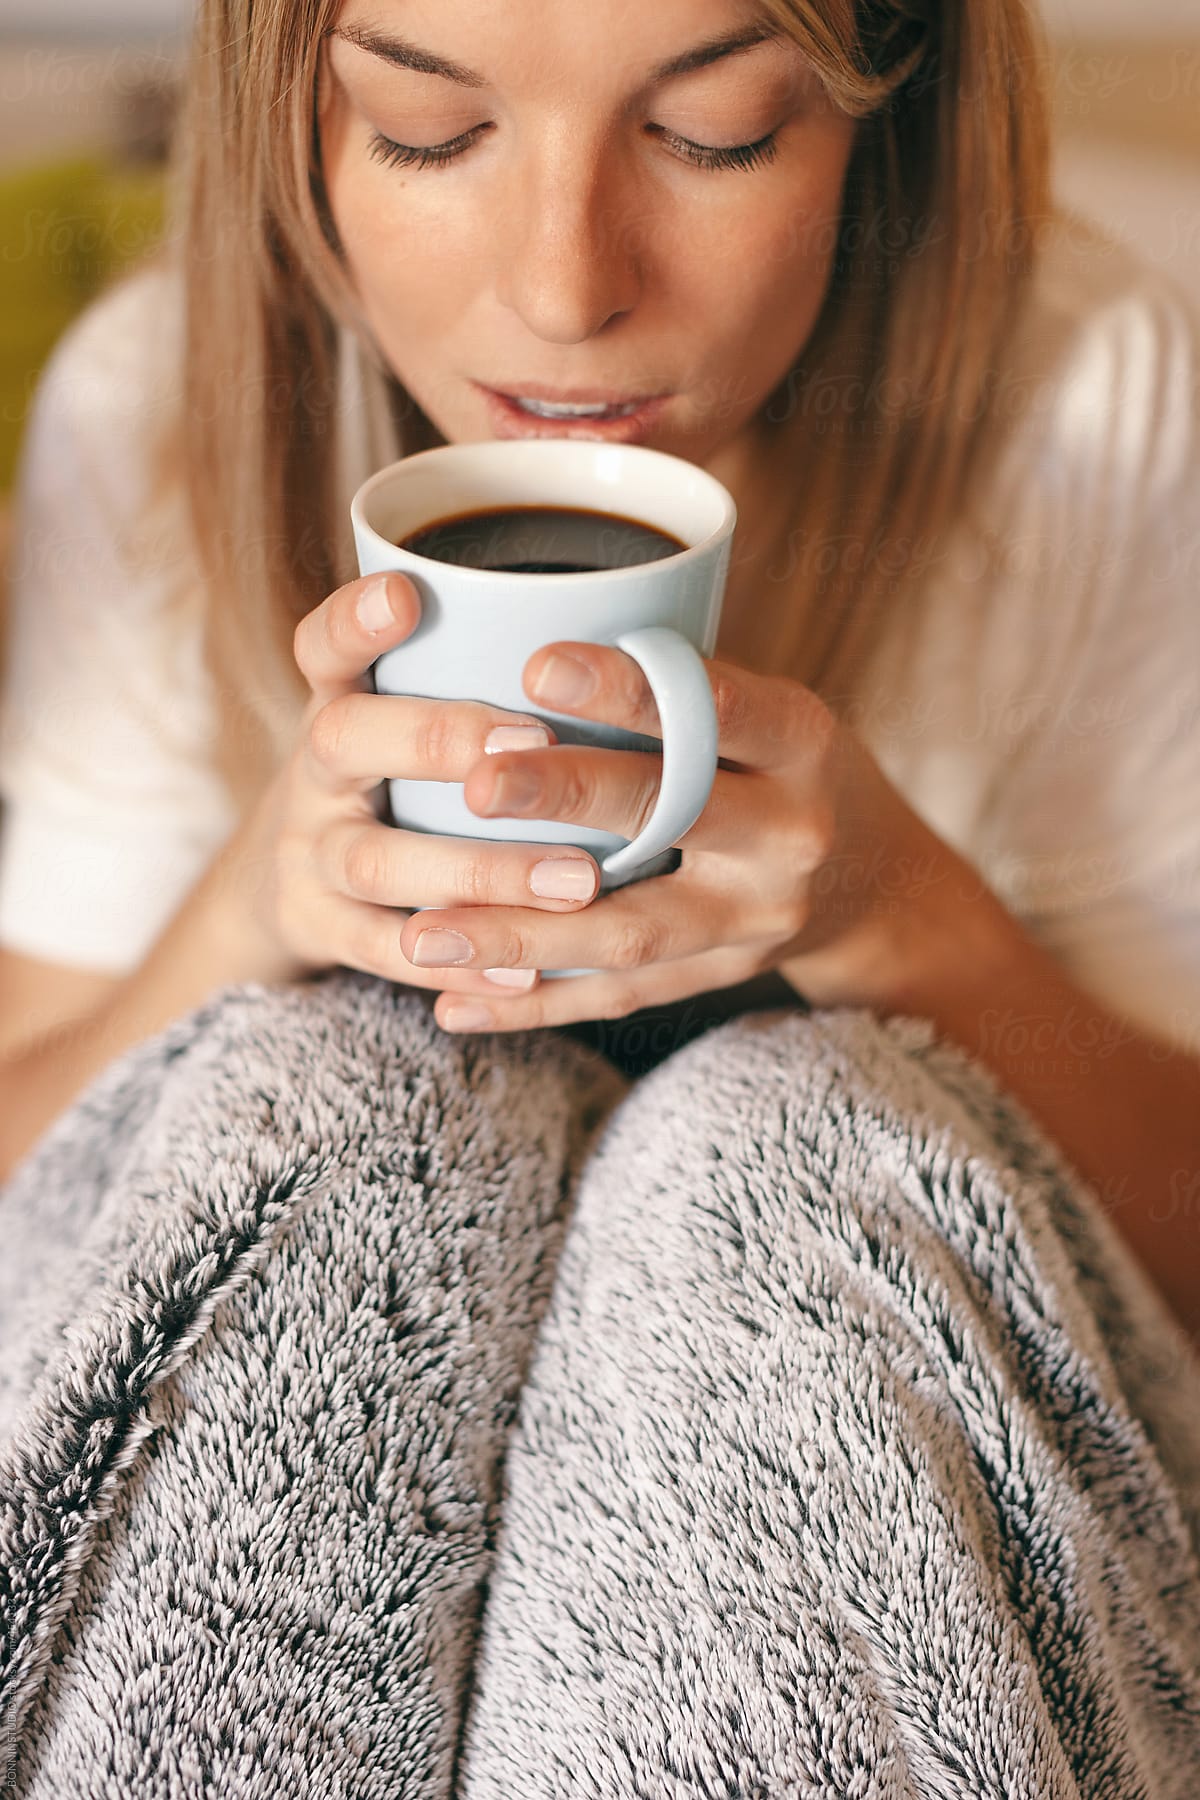 Beautiful Young Woman Drinking Coffee On The Morning At Home By Stocksy Contributor